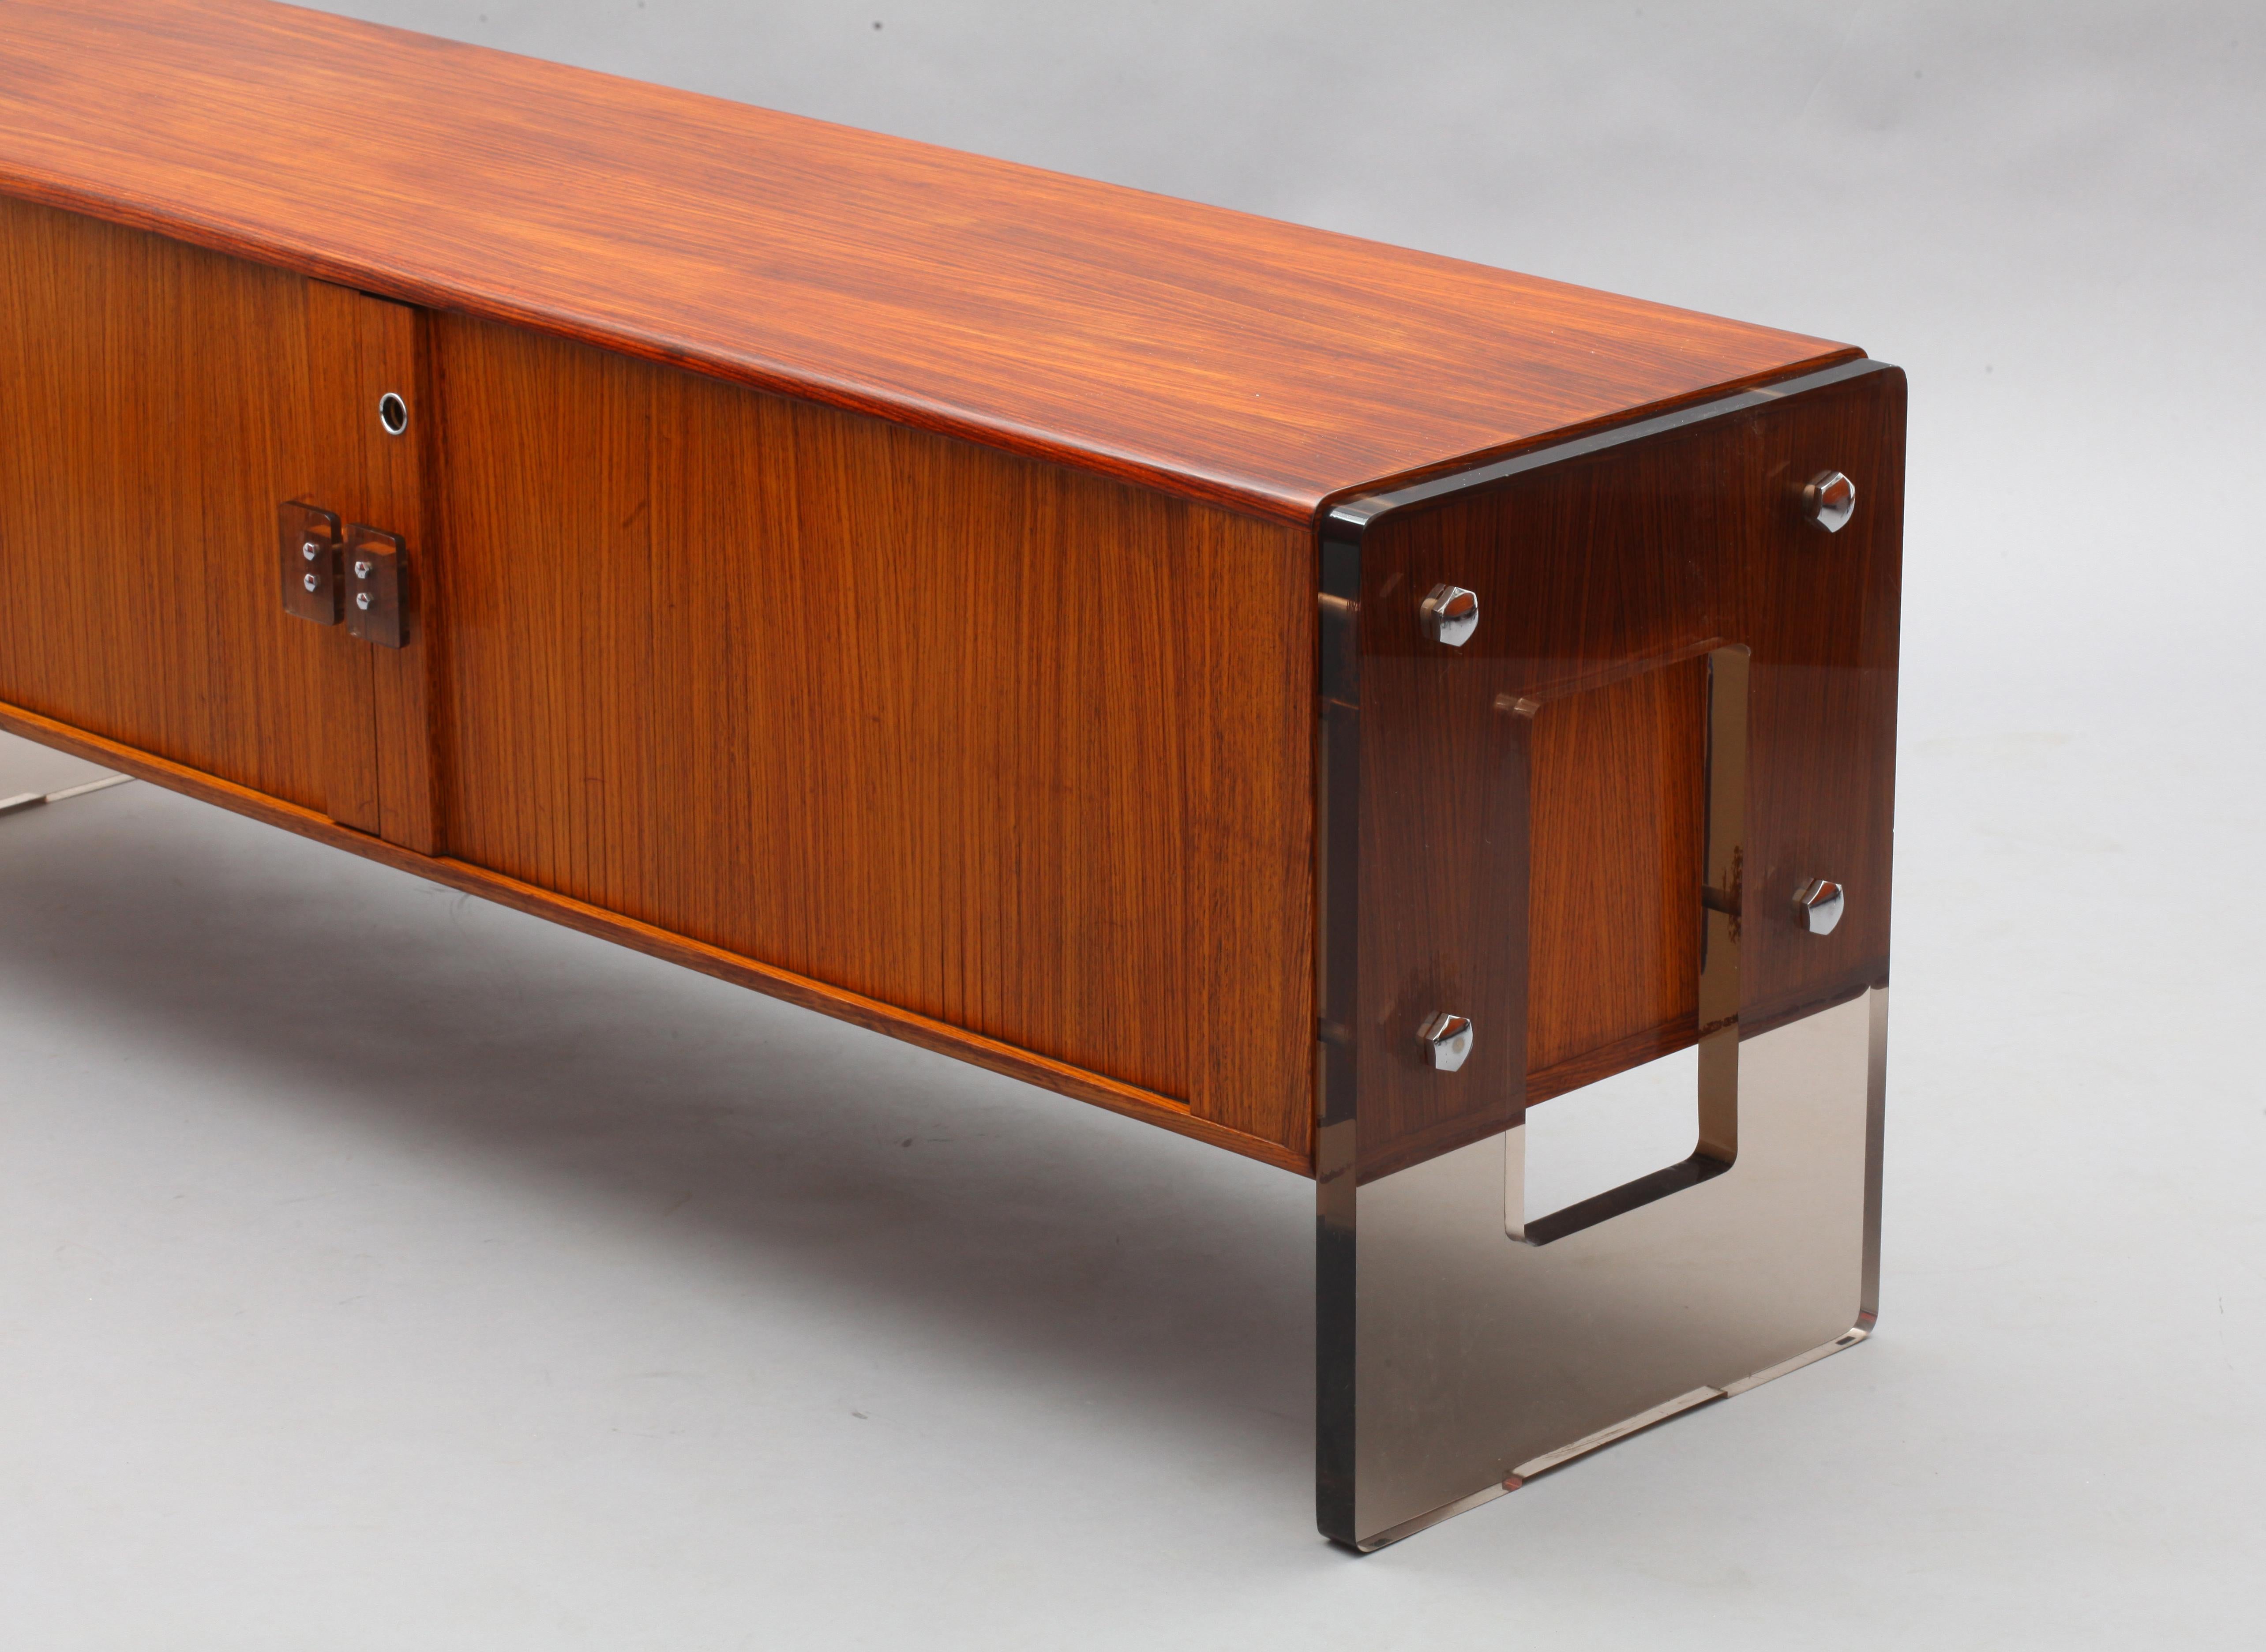 20th Century Rare Teak Sideboard with Smoke Lucite Side Parts and Sliding Tambour Doors